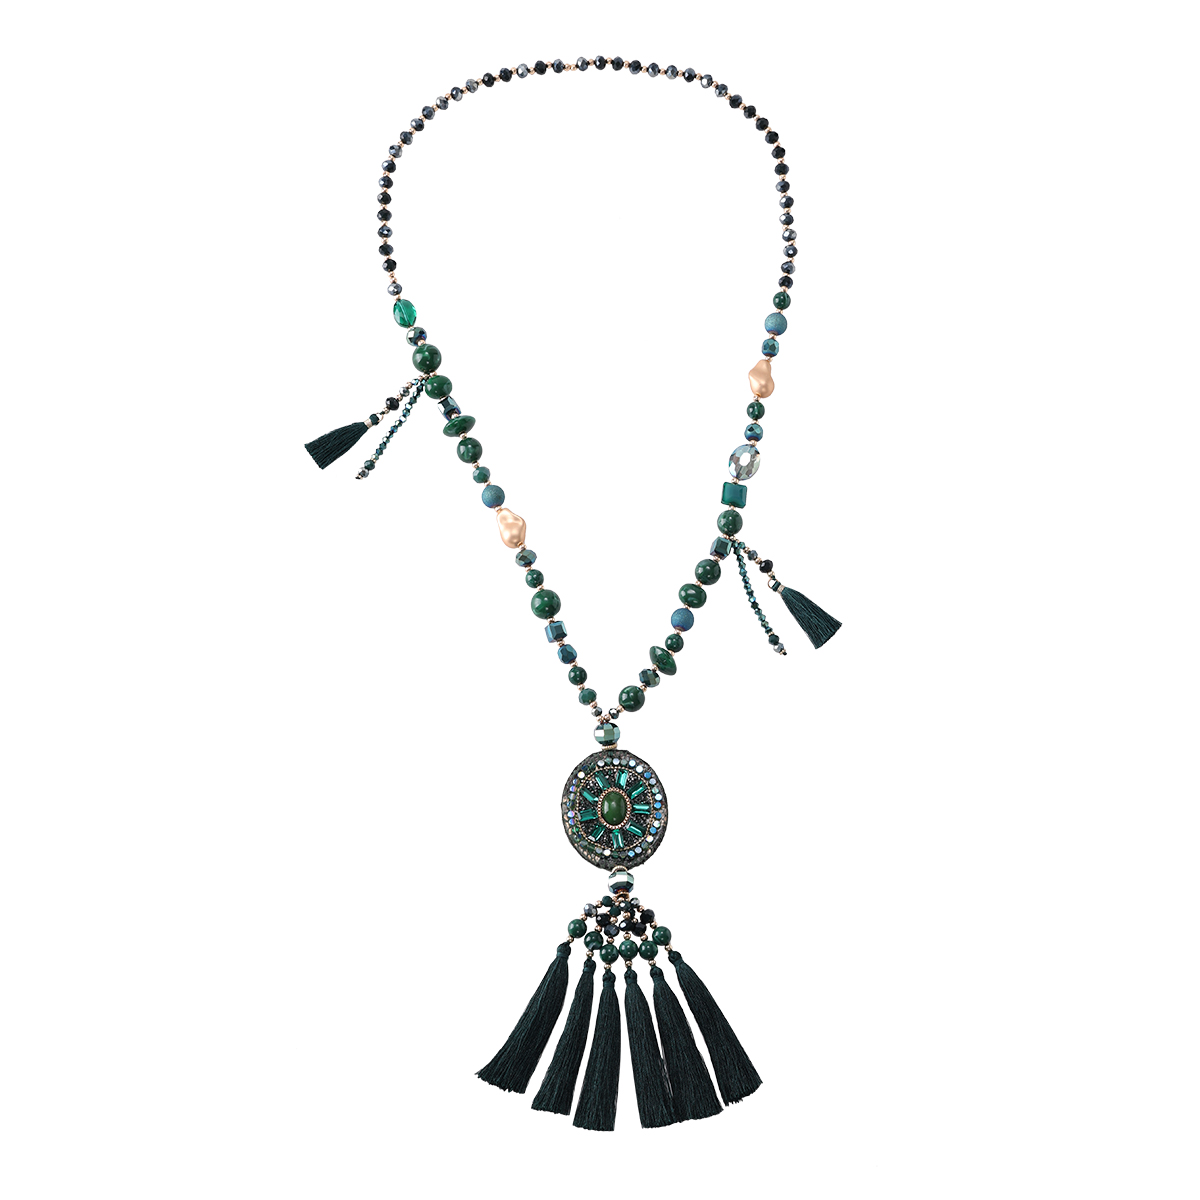 Crytal Shield Tassels Necklace